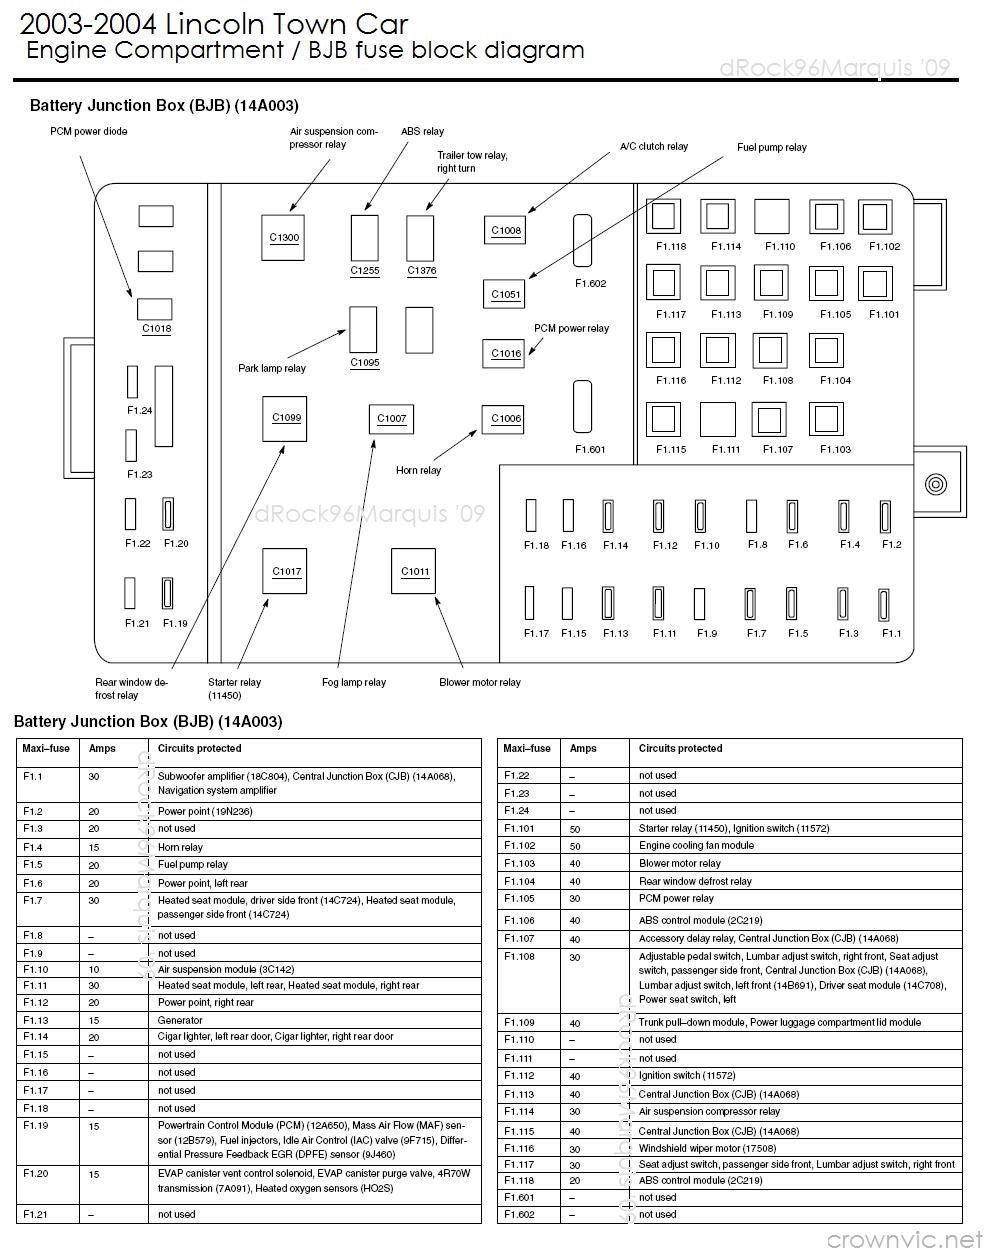 Lincoln Wiring Diagram Pdf from www.crownvic.net